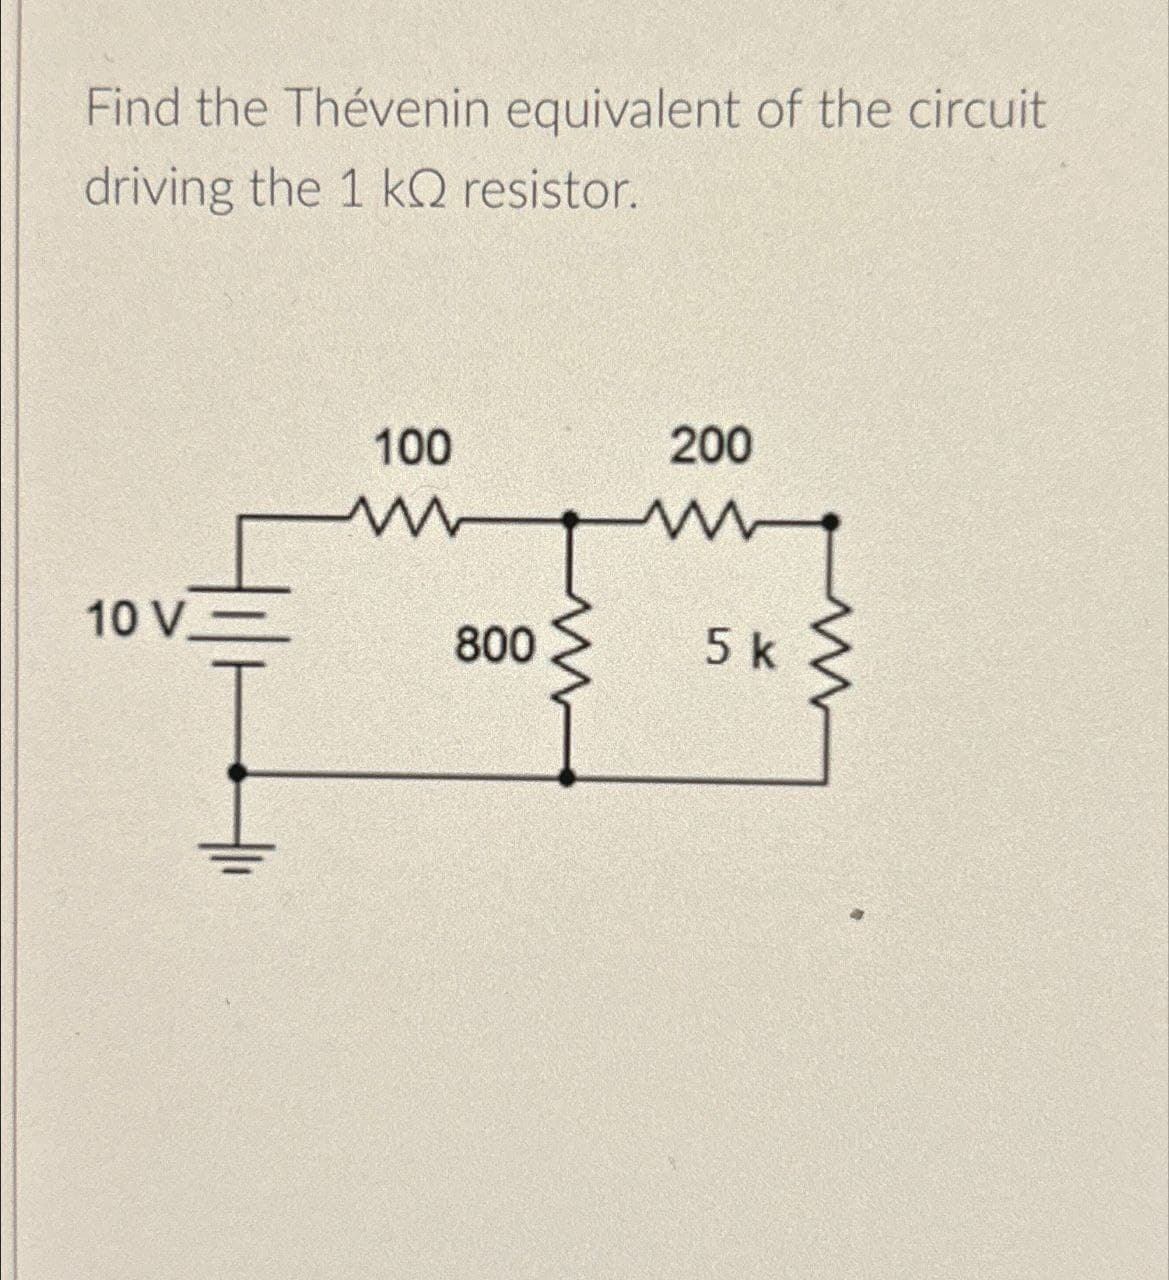 Find the Thévenin equivalent of the circuit
driving the 1 kQ resistor.
100
200
10 V.
w
800
5 k